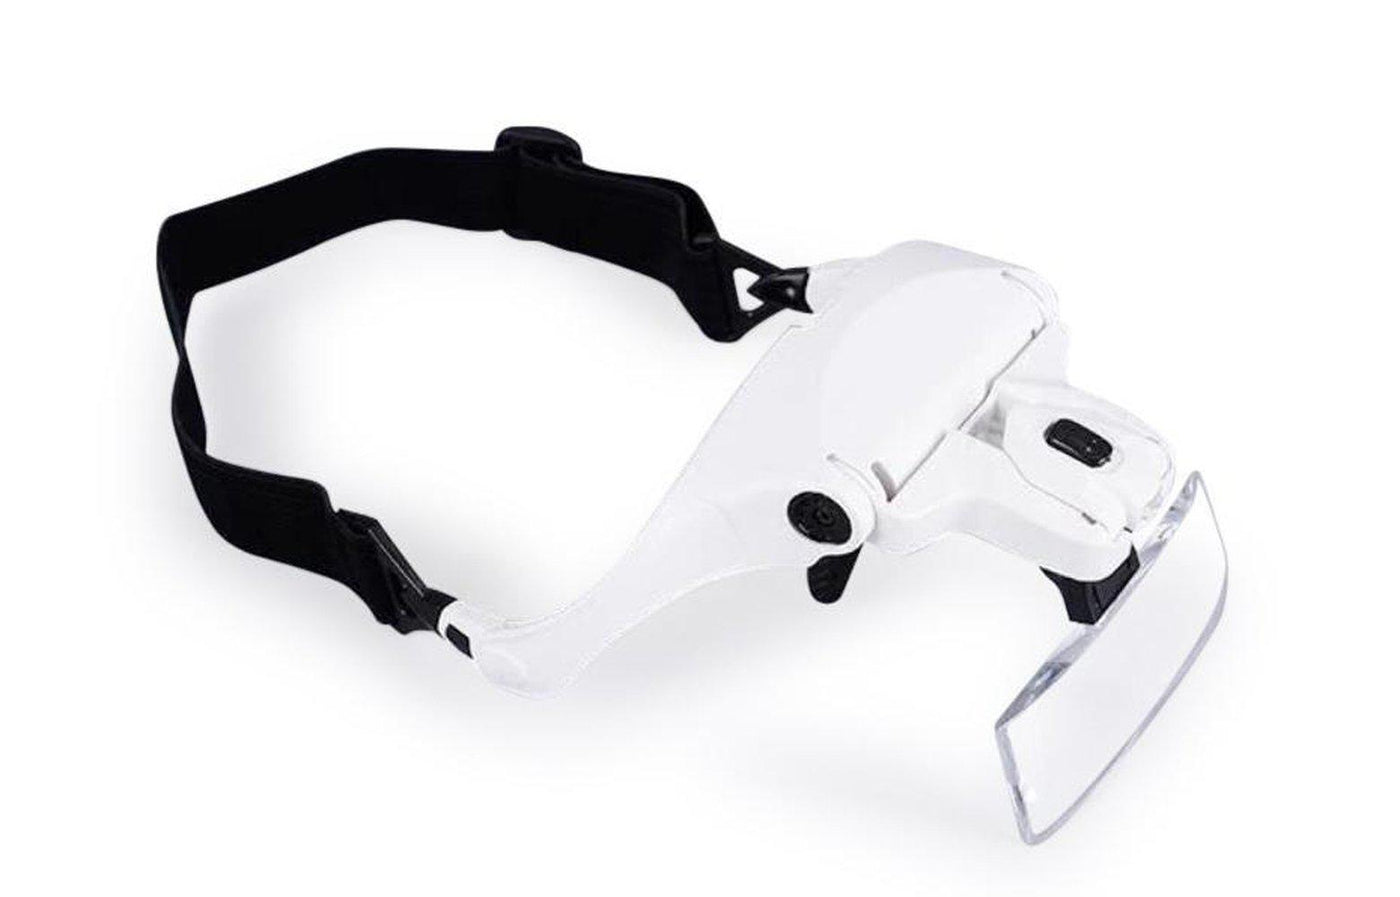 Headband Magnifier Glass With Lamp